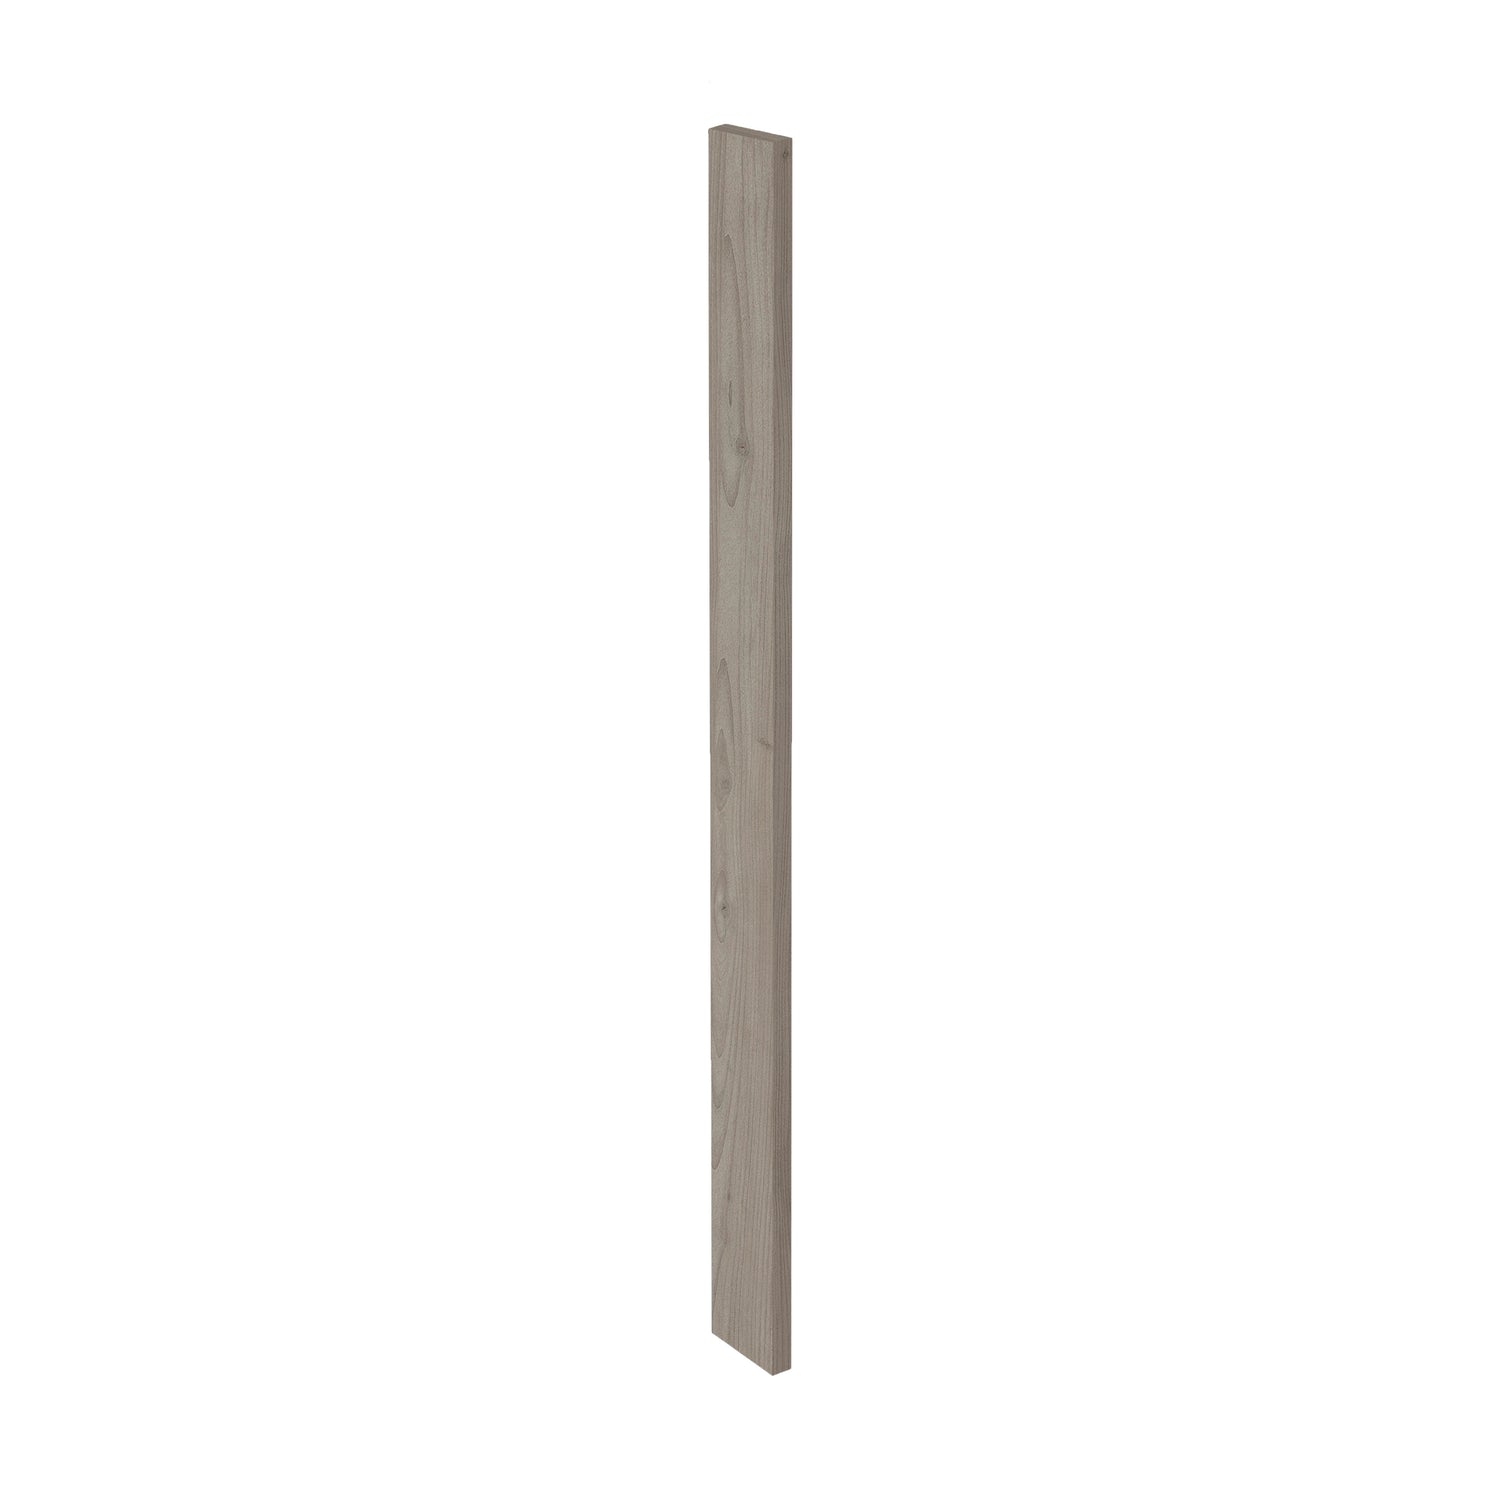 Grey Nordic Slab Style Kitchen Cabinet Filler (3 in W x 0.75 in D x 30 in H) -  Pro-Edge HD